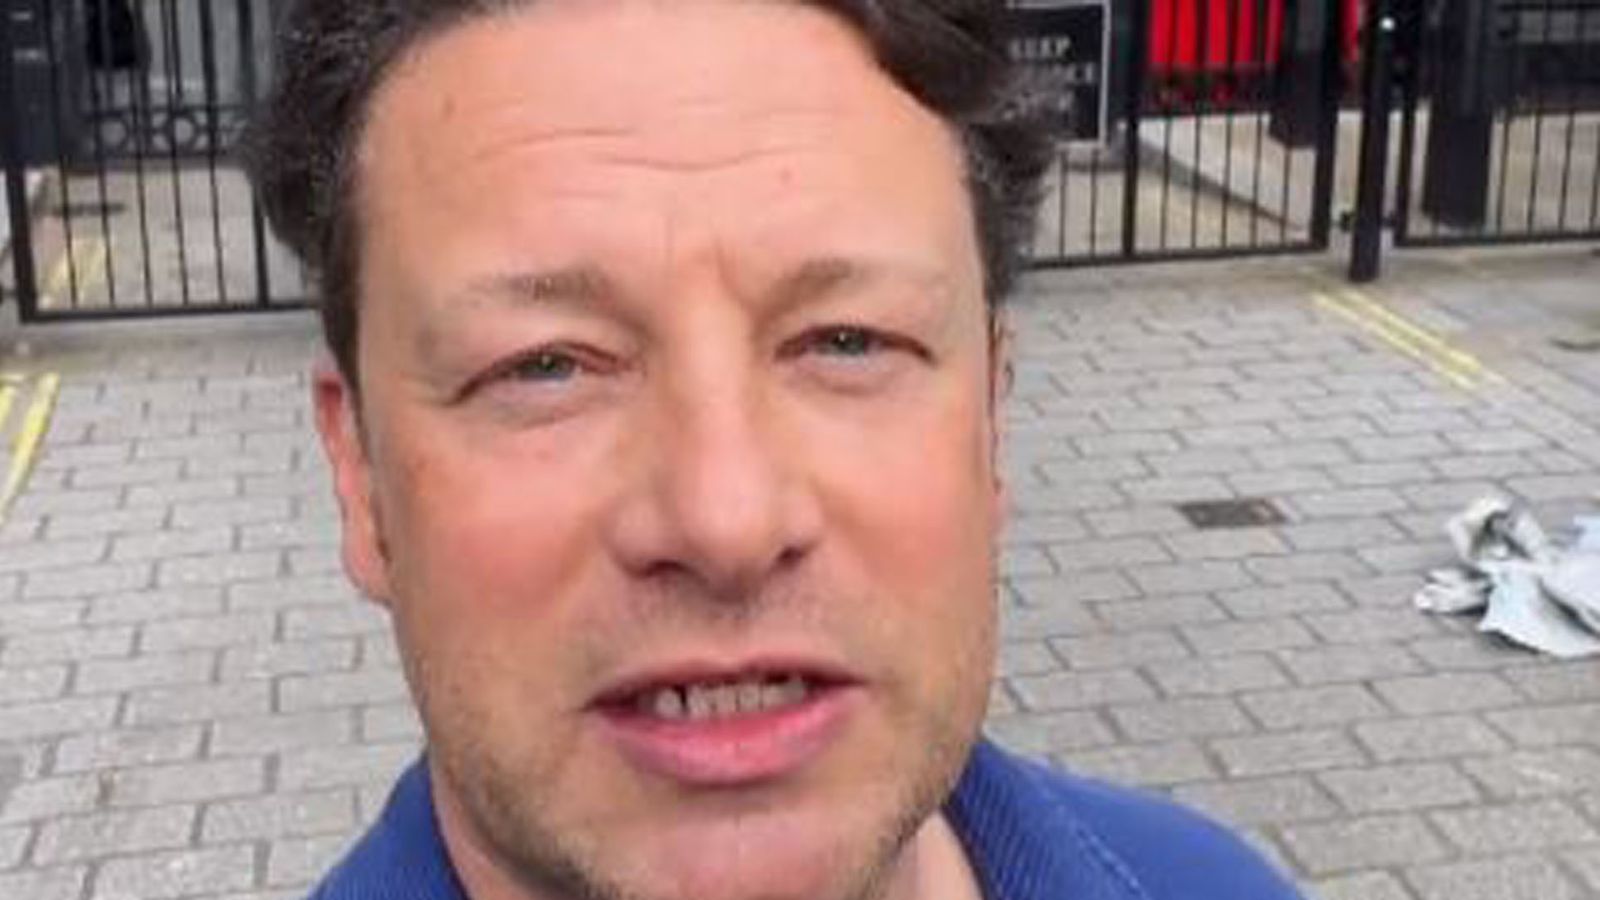 Jamie Oliver tells PM: 'You've got 36 hours or we're coming with Eton mess'